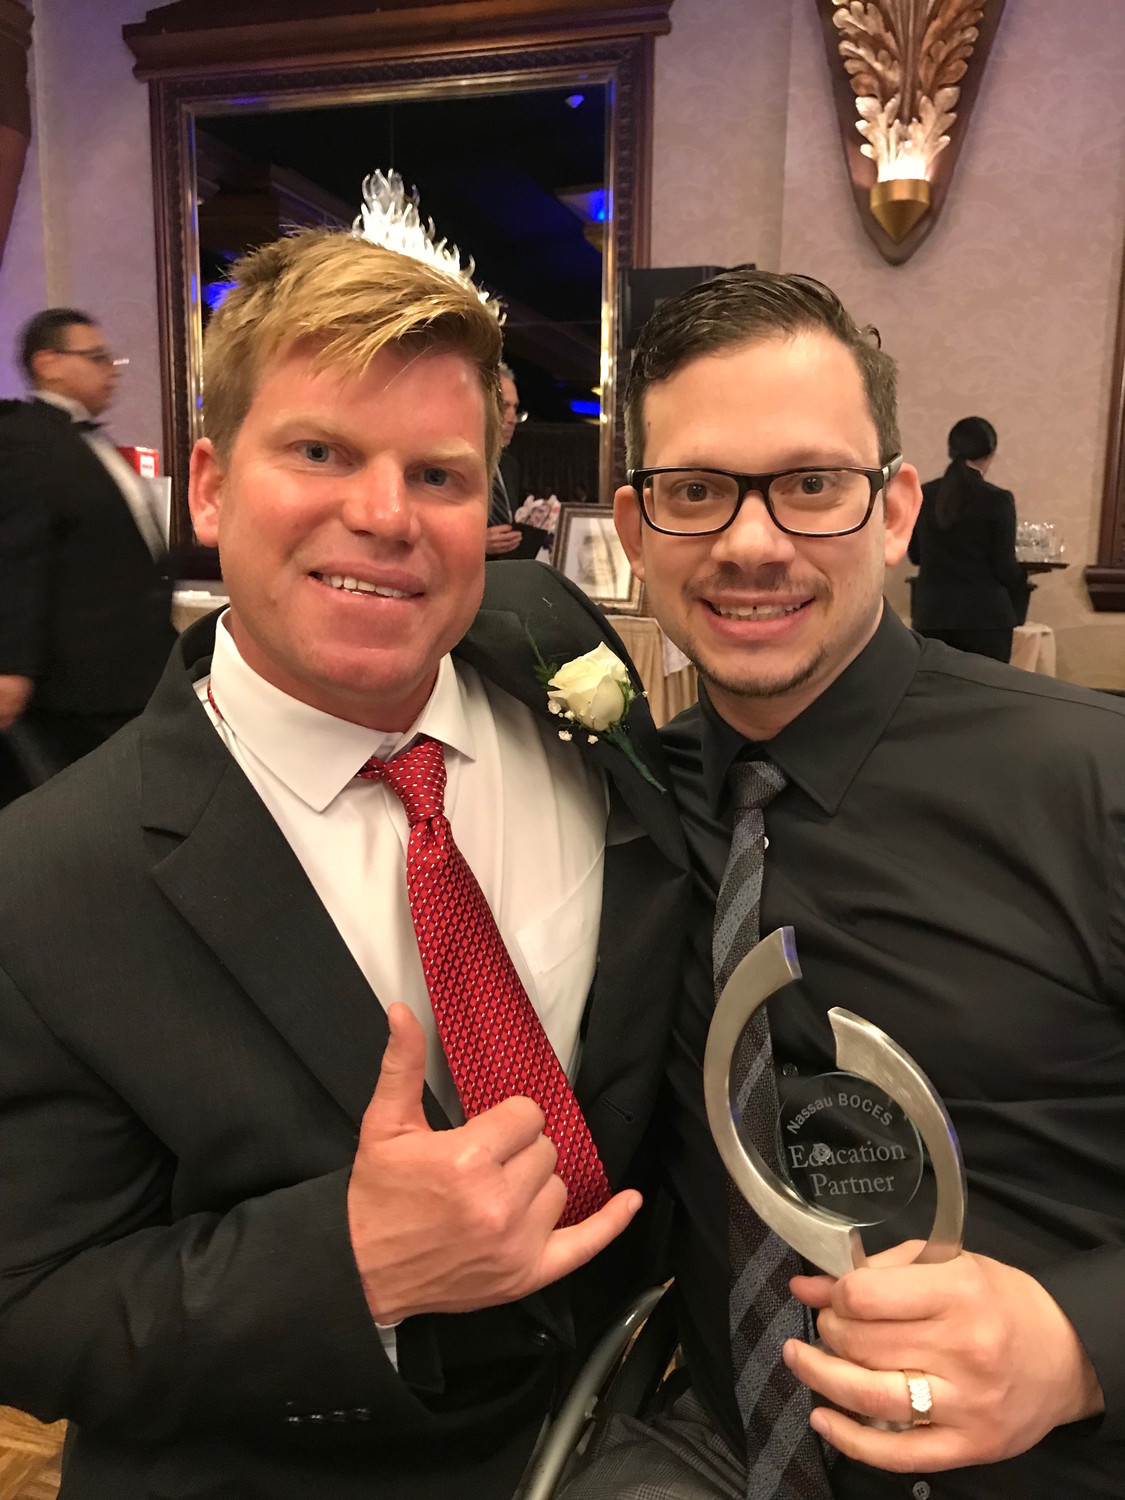 Surf for All Co-founder Cliff Skudin, left, and Surf for All athlete Adam Halpern, a professor at Hofstra University, at the Nassau BOCES 12th annual Education Partner Awards Gala on April 11, where Surf for All received the Nassau BOCES Education Partner award.